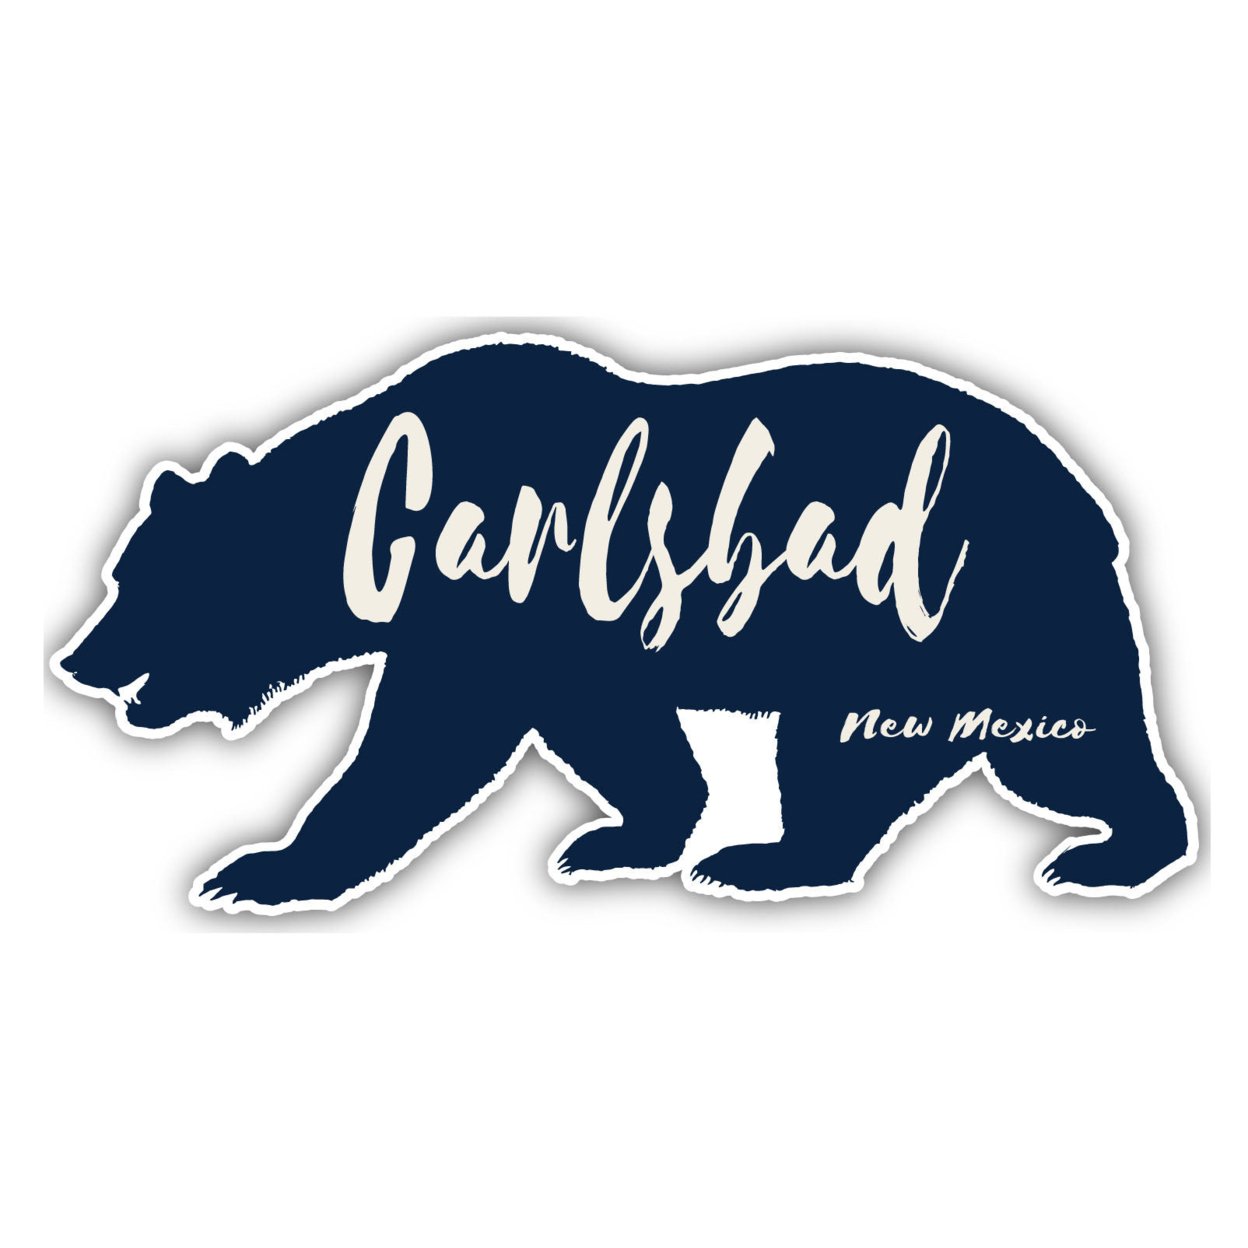 Carlsbad New Mexico Souvenir Decorative Stickers (Choose Theme And Size) - Single Unit, 2-Inch, Bear